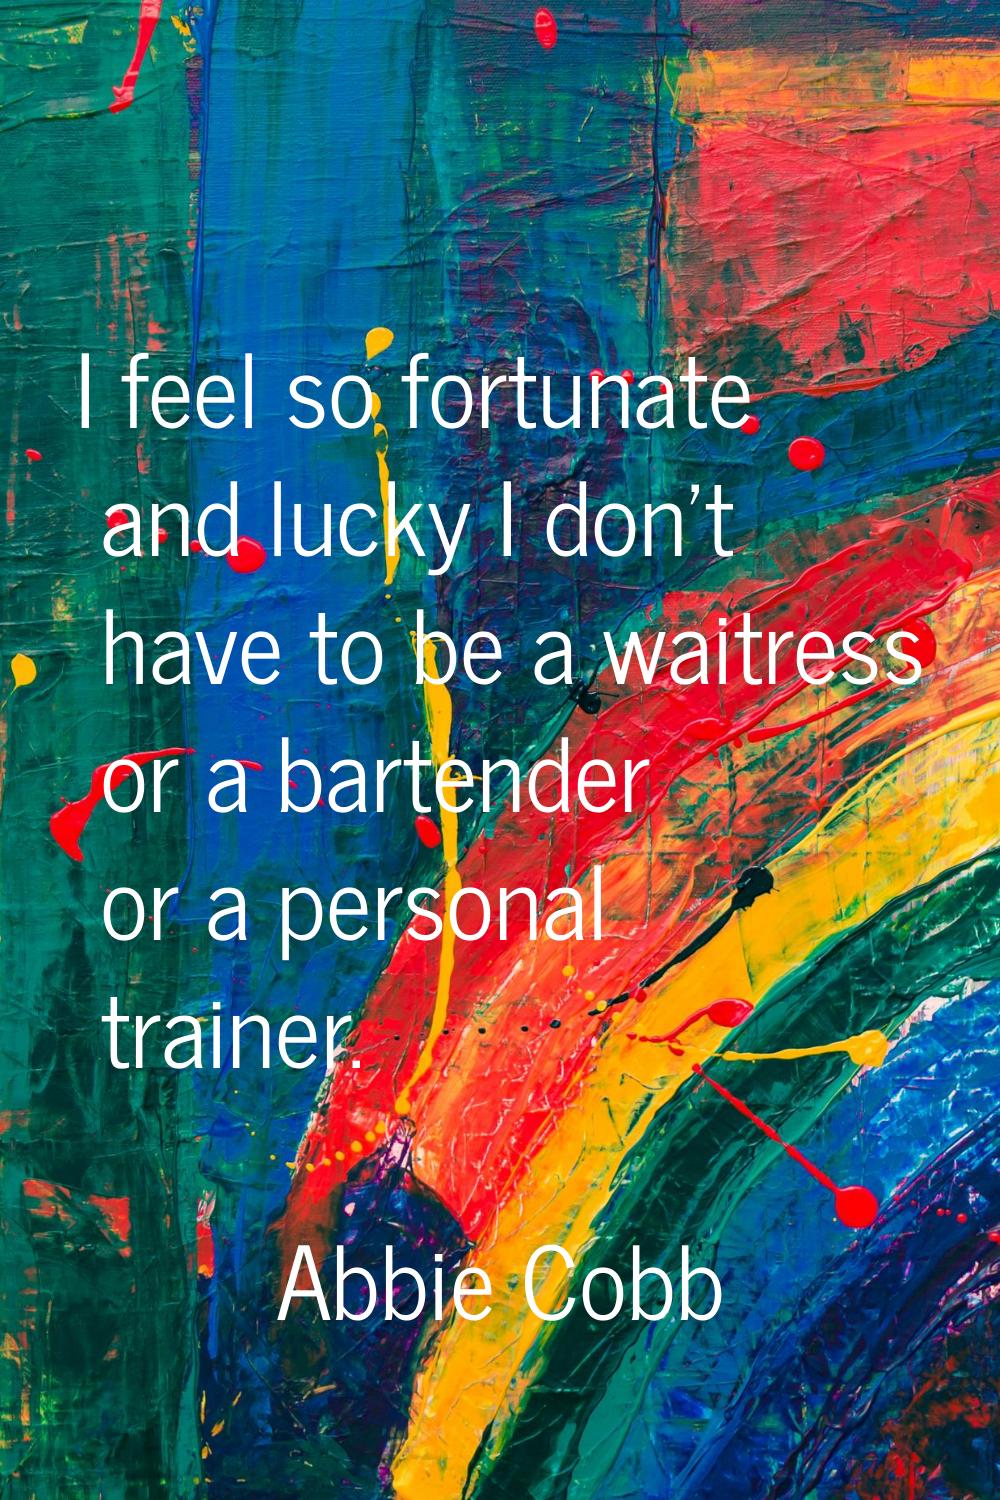 I feel so fortunate and lucky I don't have to be a waitress or a bartender or a personal trainer.